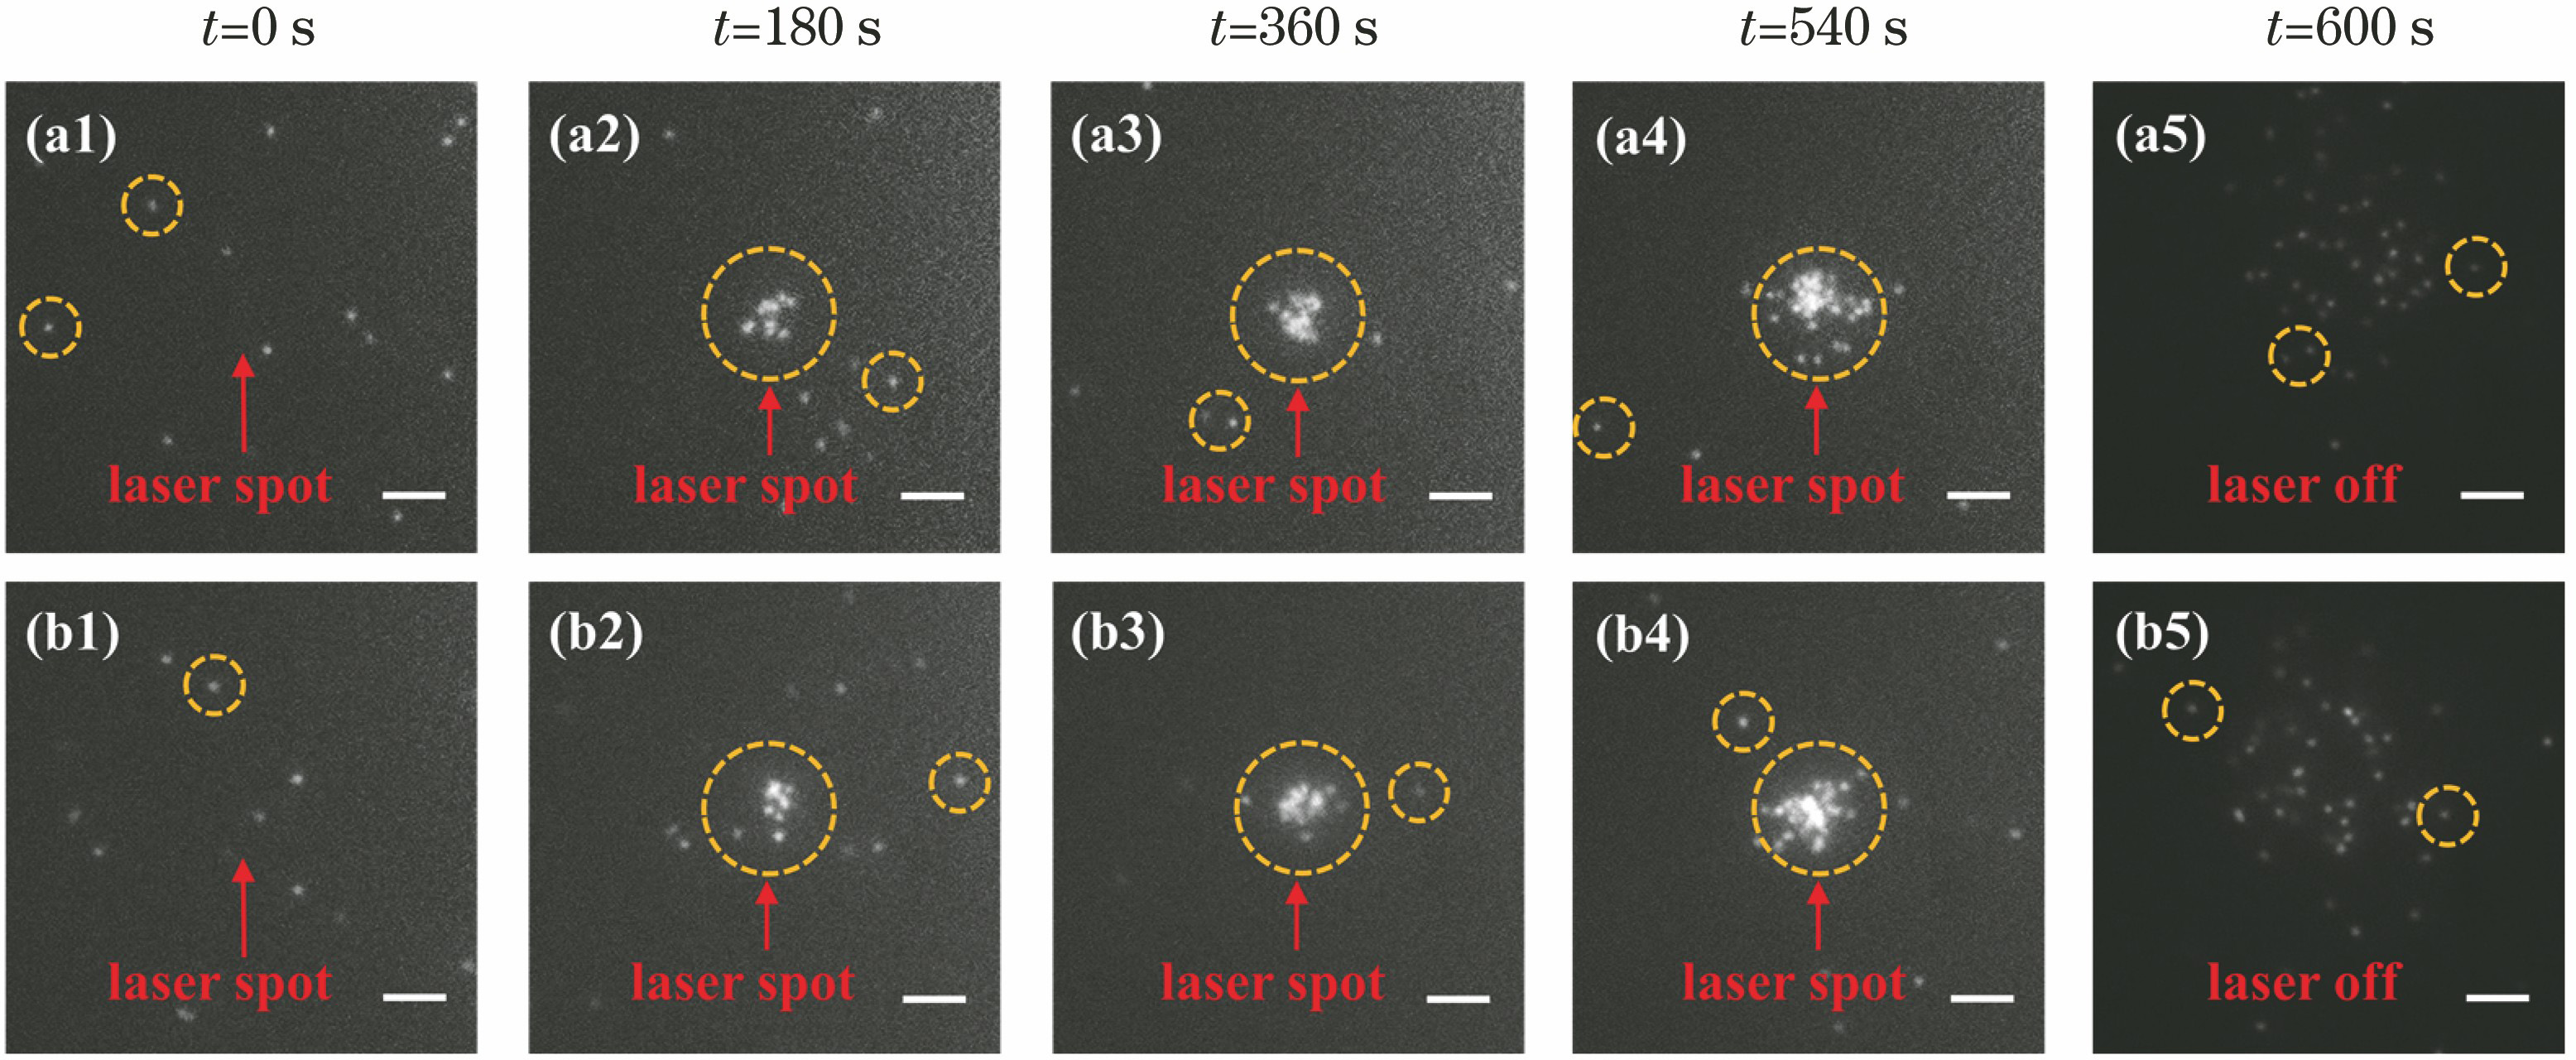 Dark field imaging of gold nanoparticles trapped by laser (scale bar is 5 μm). Arrow represents the position of the focal spot, circles represent gold nanoparticles. (a1)--(a5) Dark field imaging of gold nanocubes trapped by laser; (b1)--(b5) dark field imaging of gold nanospheres trapped by laser